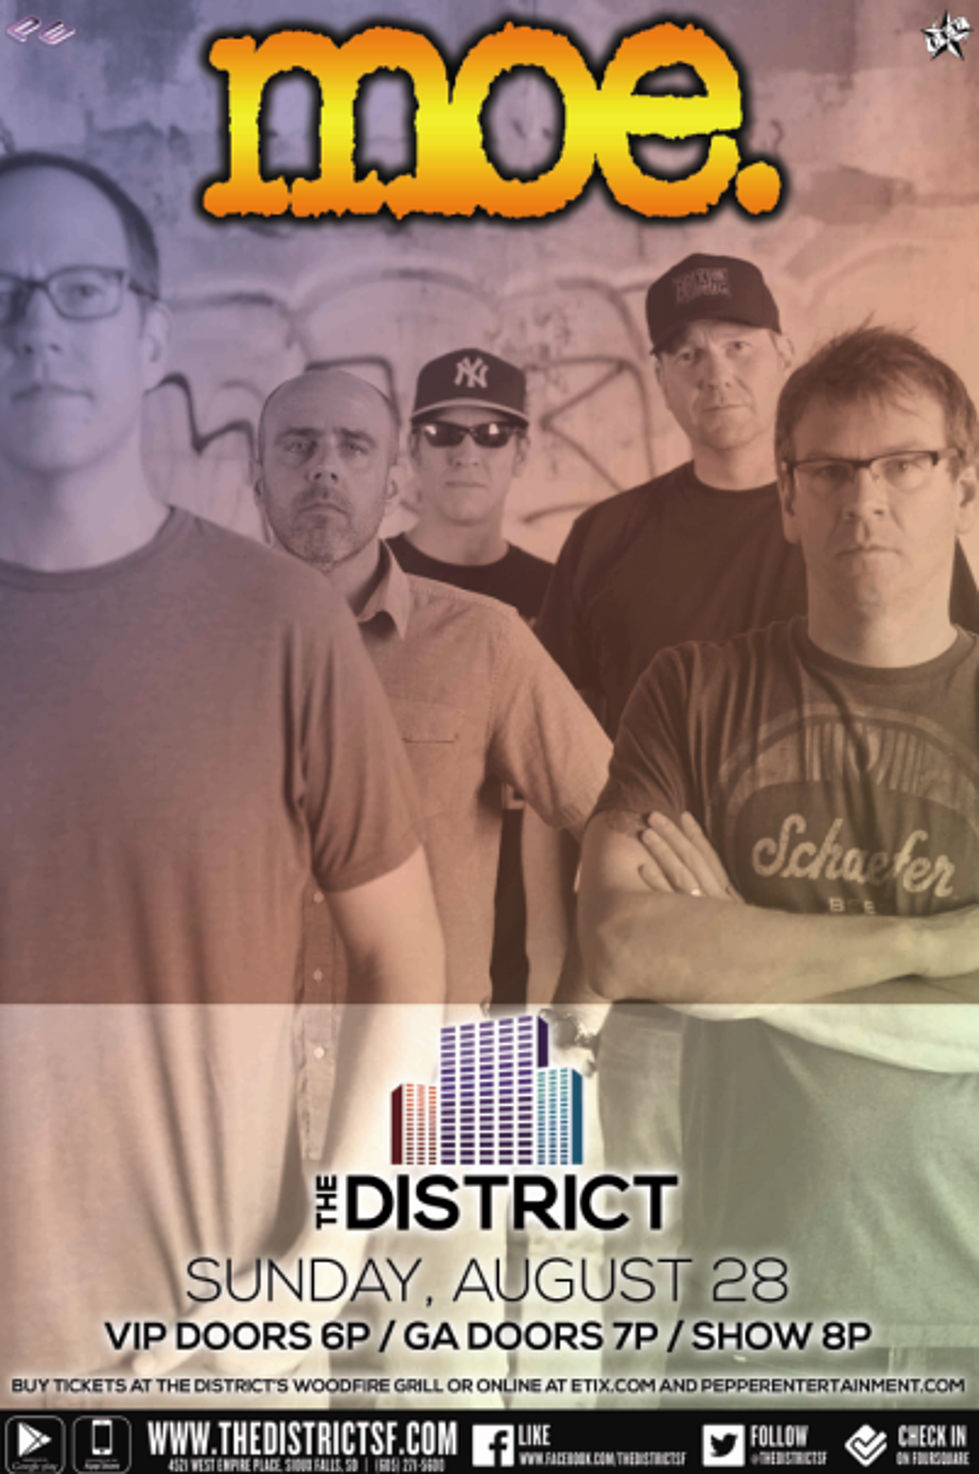 moe. Will Rock the District August 28th